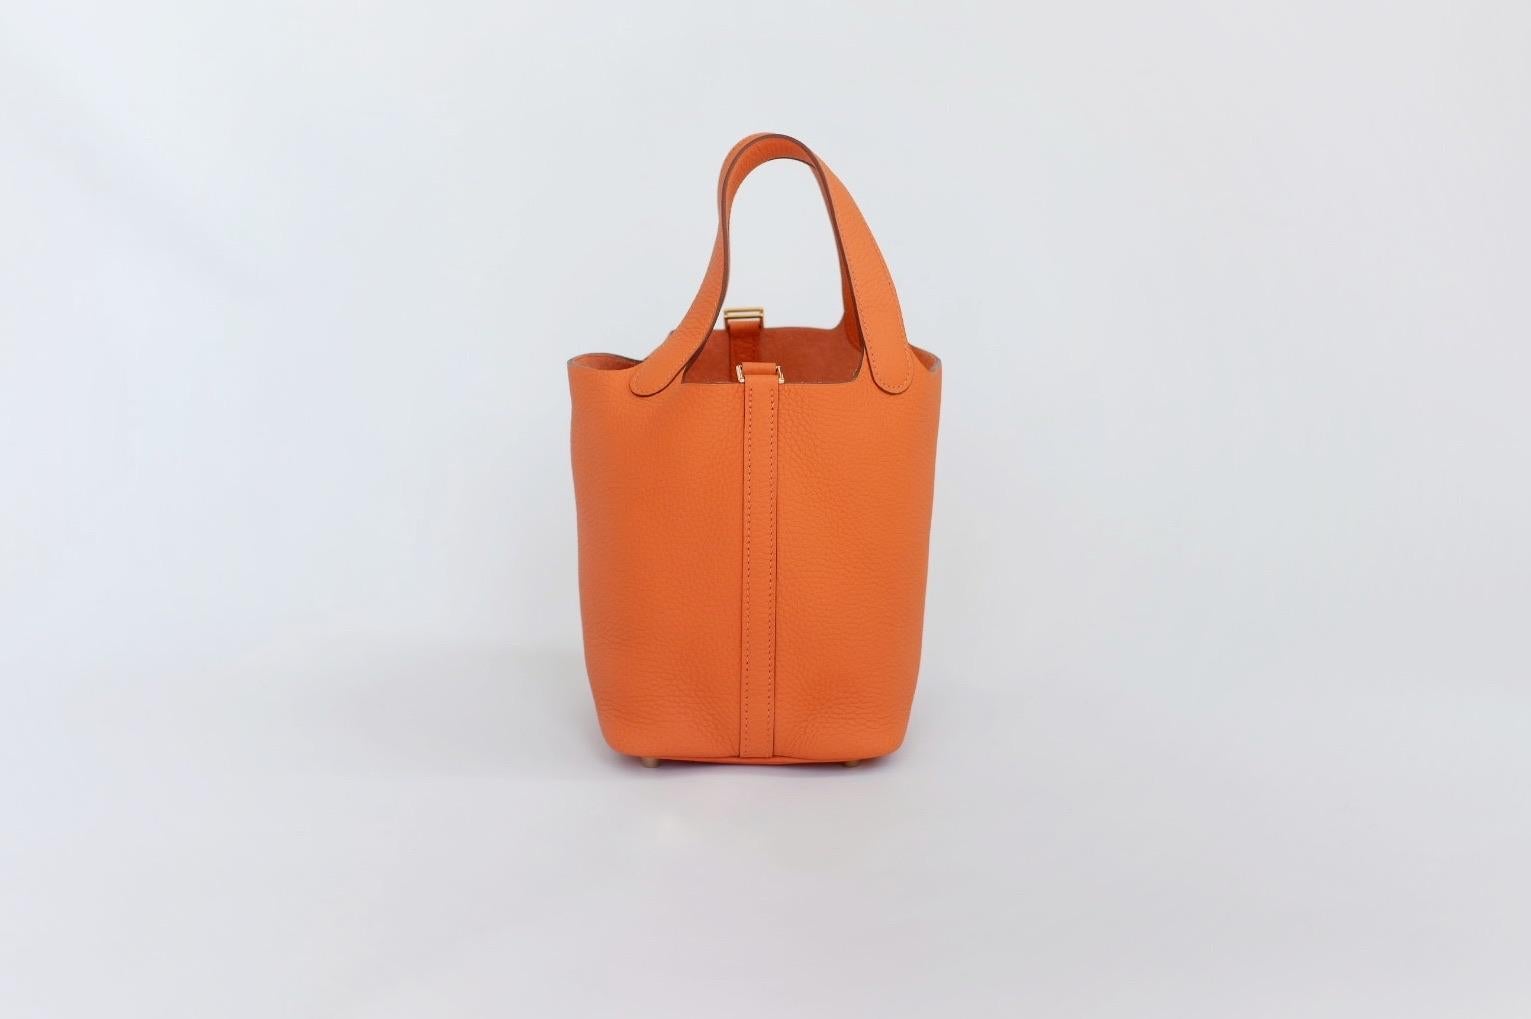 Hermes Picotin 18cm Minium Orange in Epsom Leather with Gold Hardware (GHW). Brand New comes with box and full set, accessors and receipt.